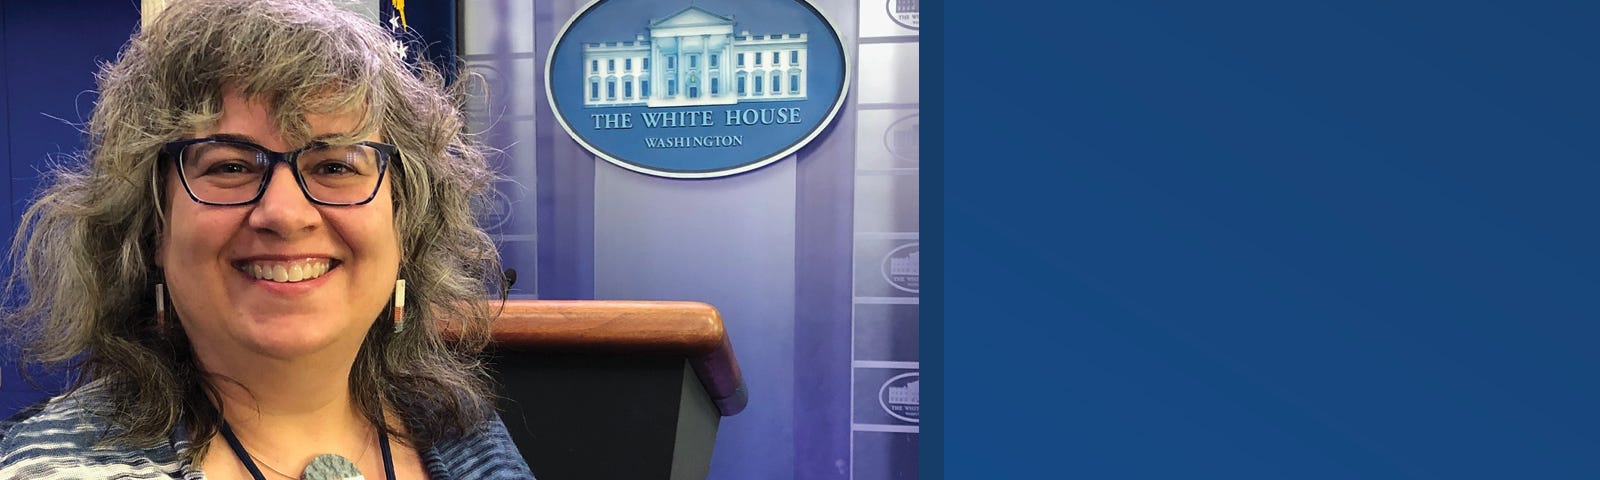 A woman stands in front of a wooden podium and the seal of The White House. She has shoulder-length grey and black hair and wears black glasses. There is a vertical blue line and to the right of that line is white text on a blue background that reads “Martha Wilkes, designer & accessibility strategist”